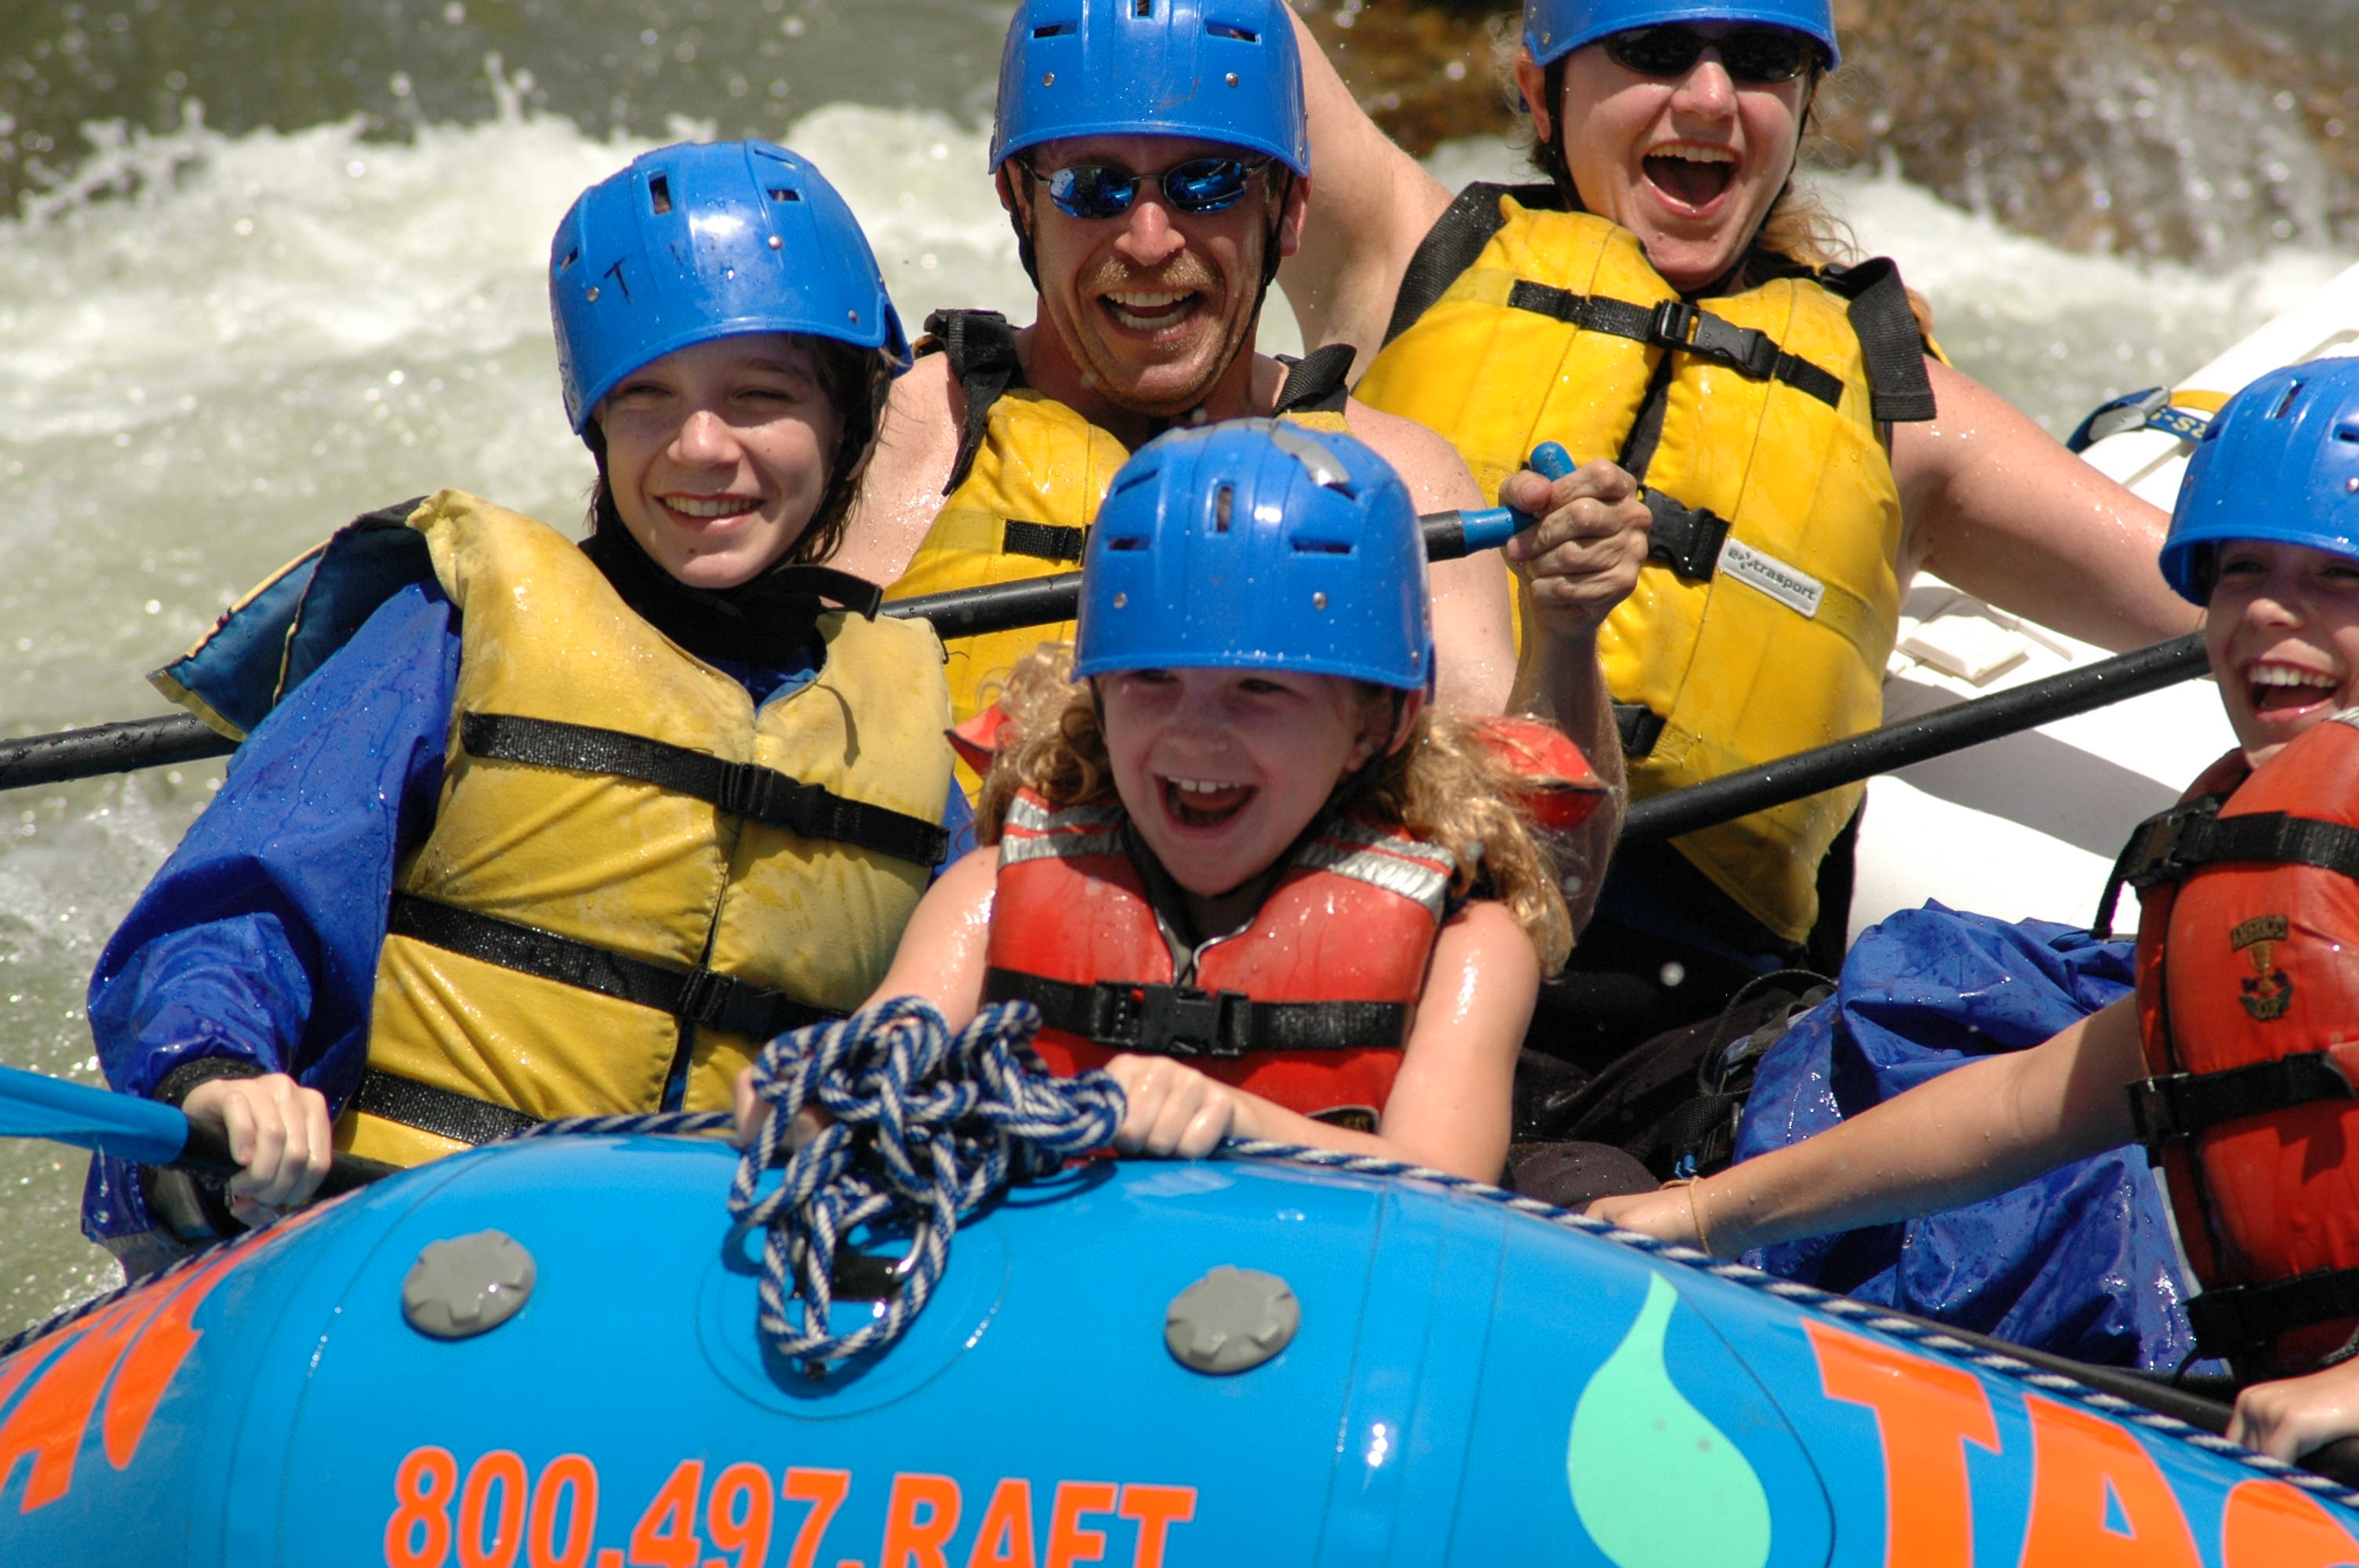 The Adventure Company caters to families, organizations and adult groups.